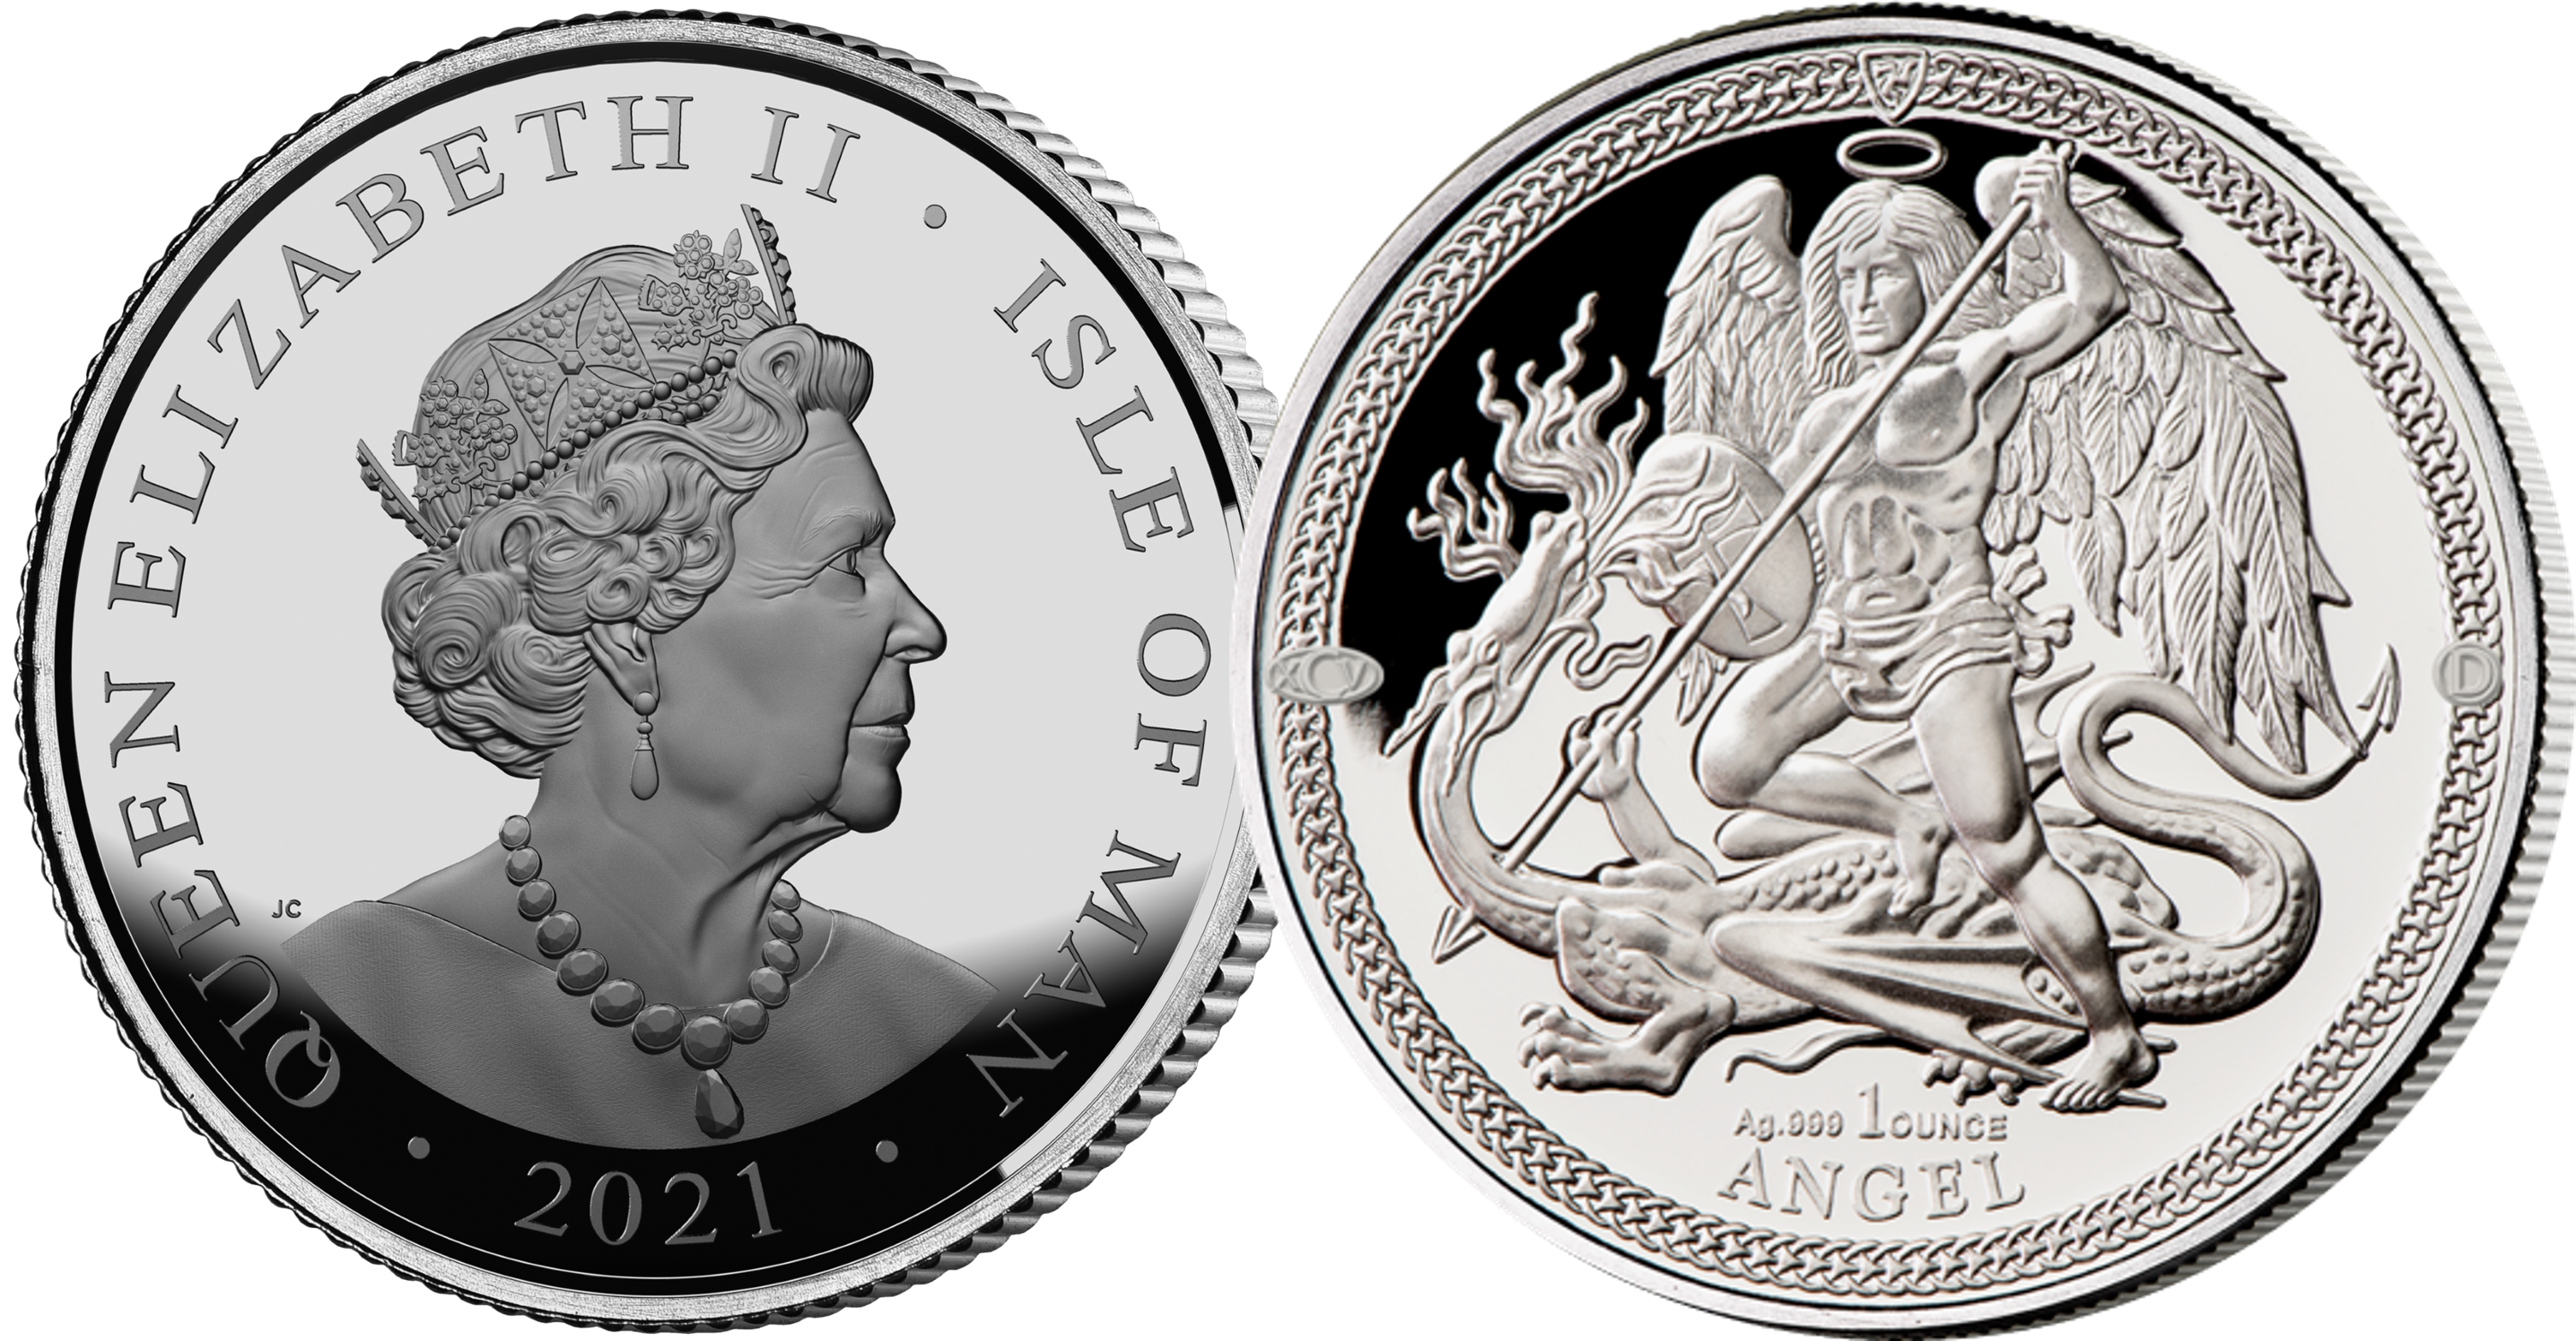  The world wide renowned Angel design commemorates a Dual Royal Anniversary with an double mintmark for the first time ever!